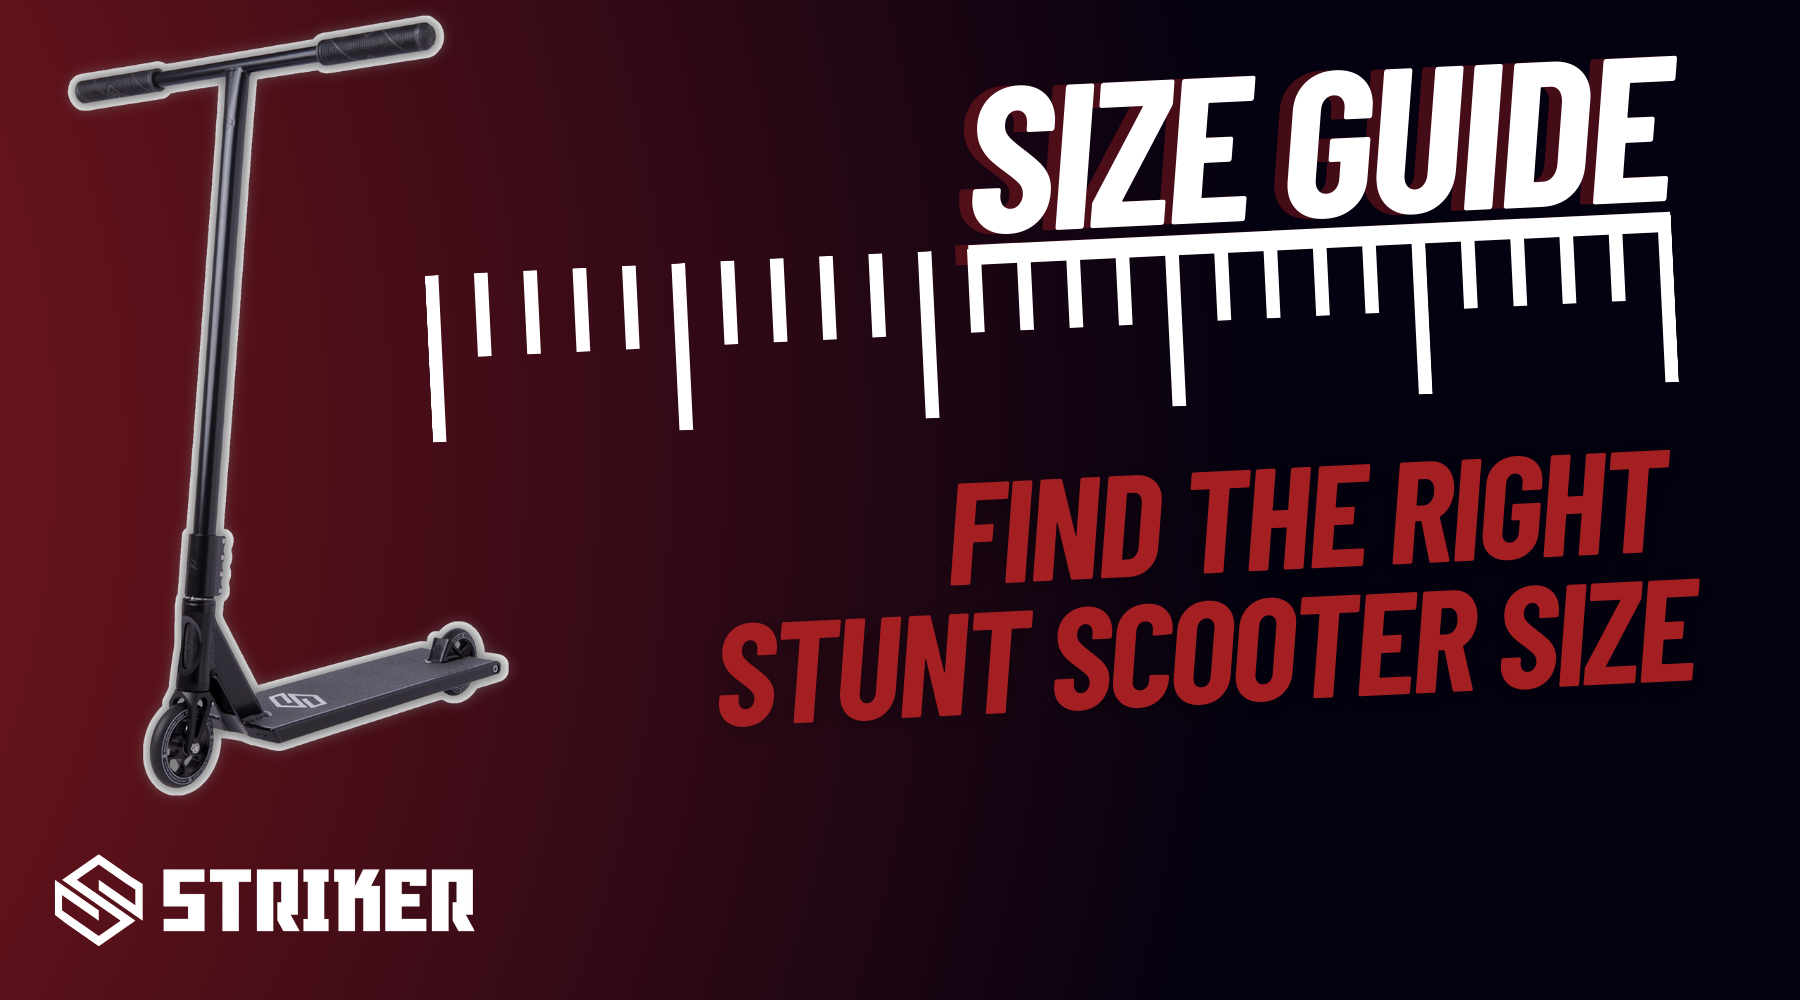 stunt scooter size guide